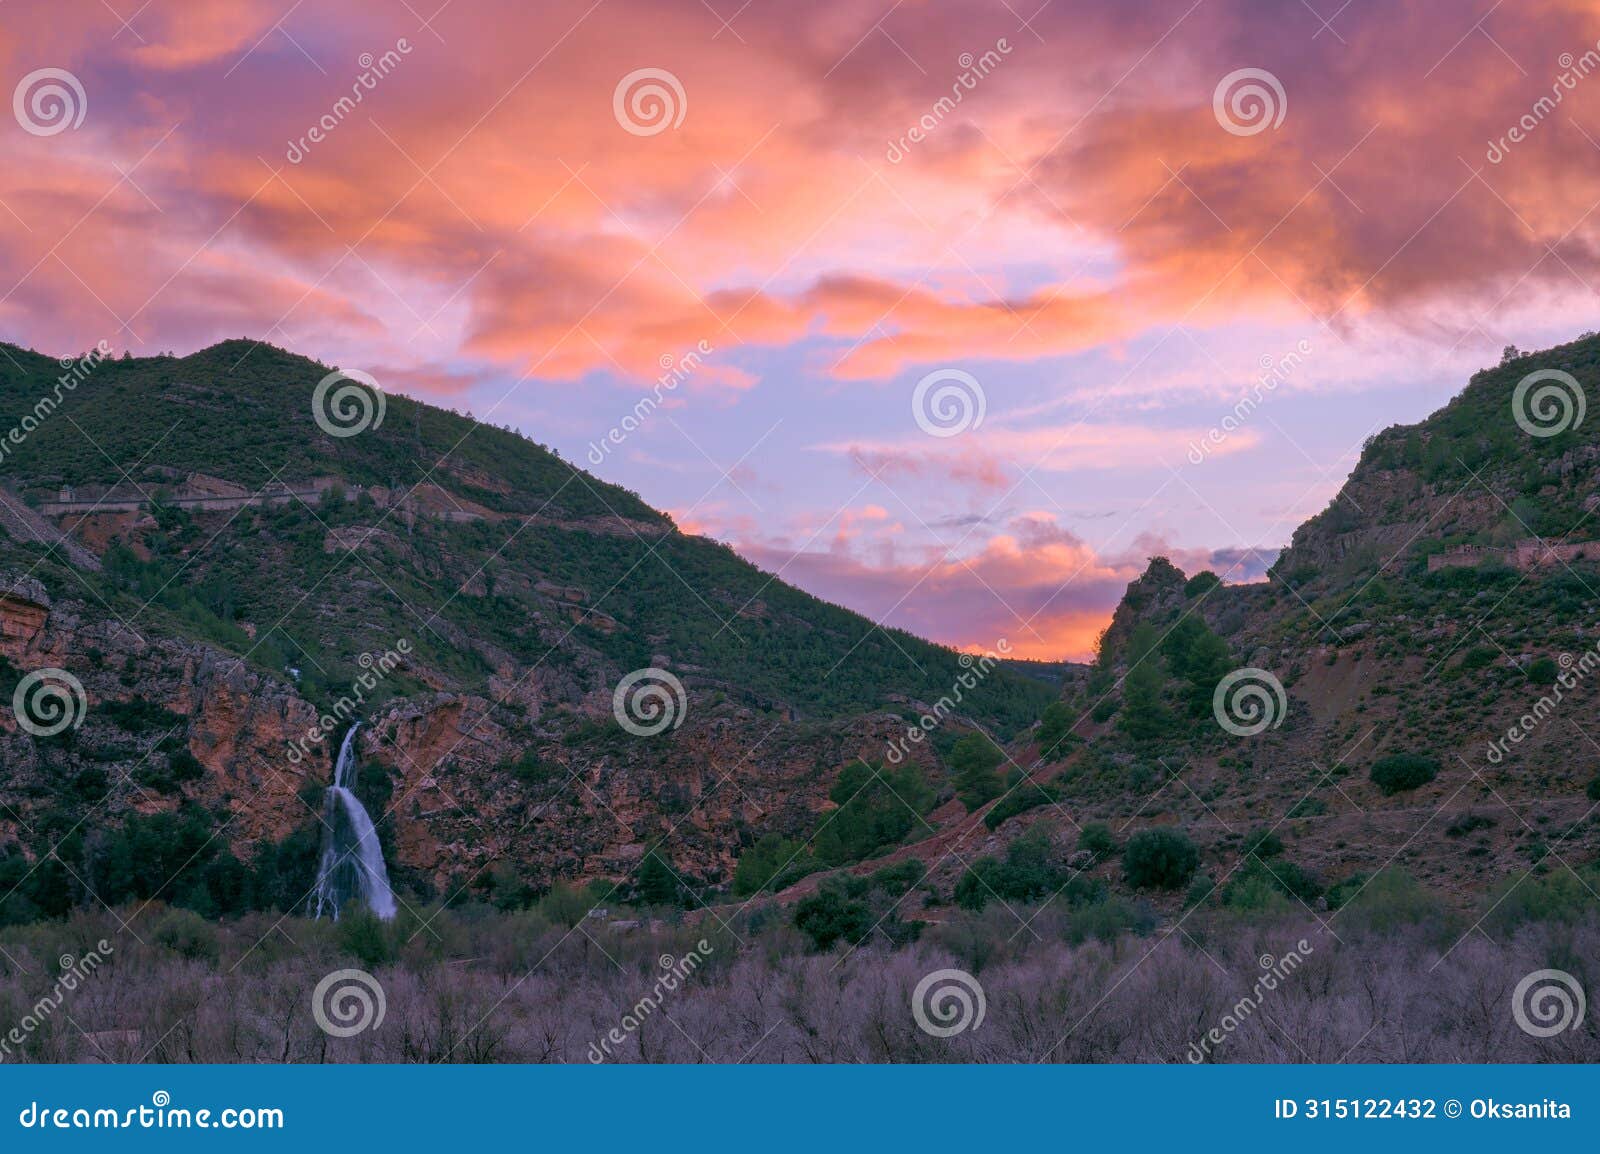 waterfall cascading against a breathtaking sunset backdrop.